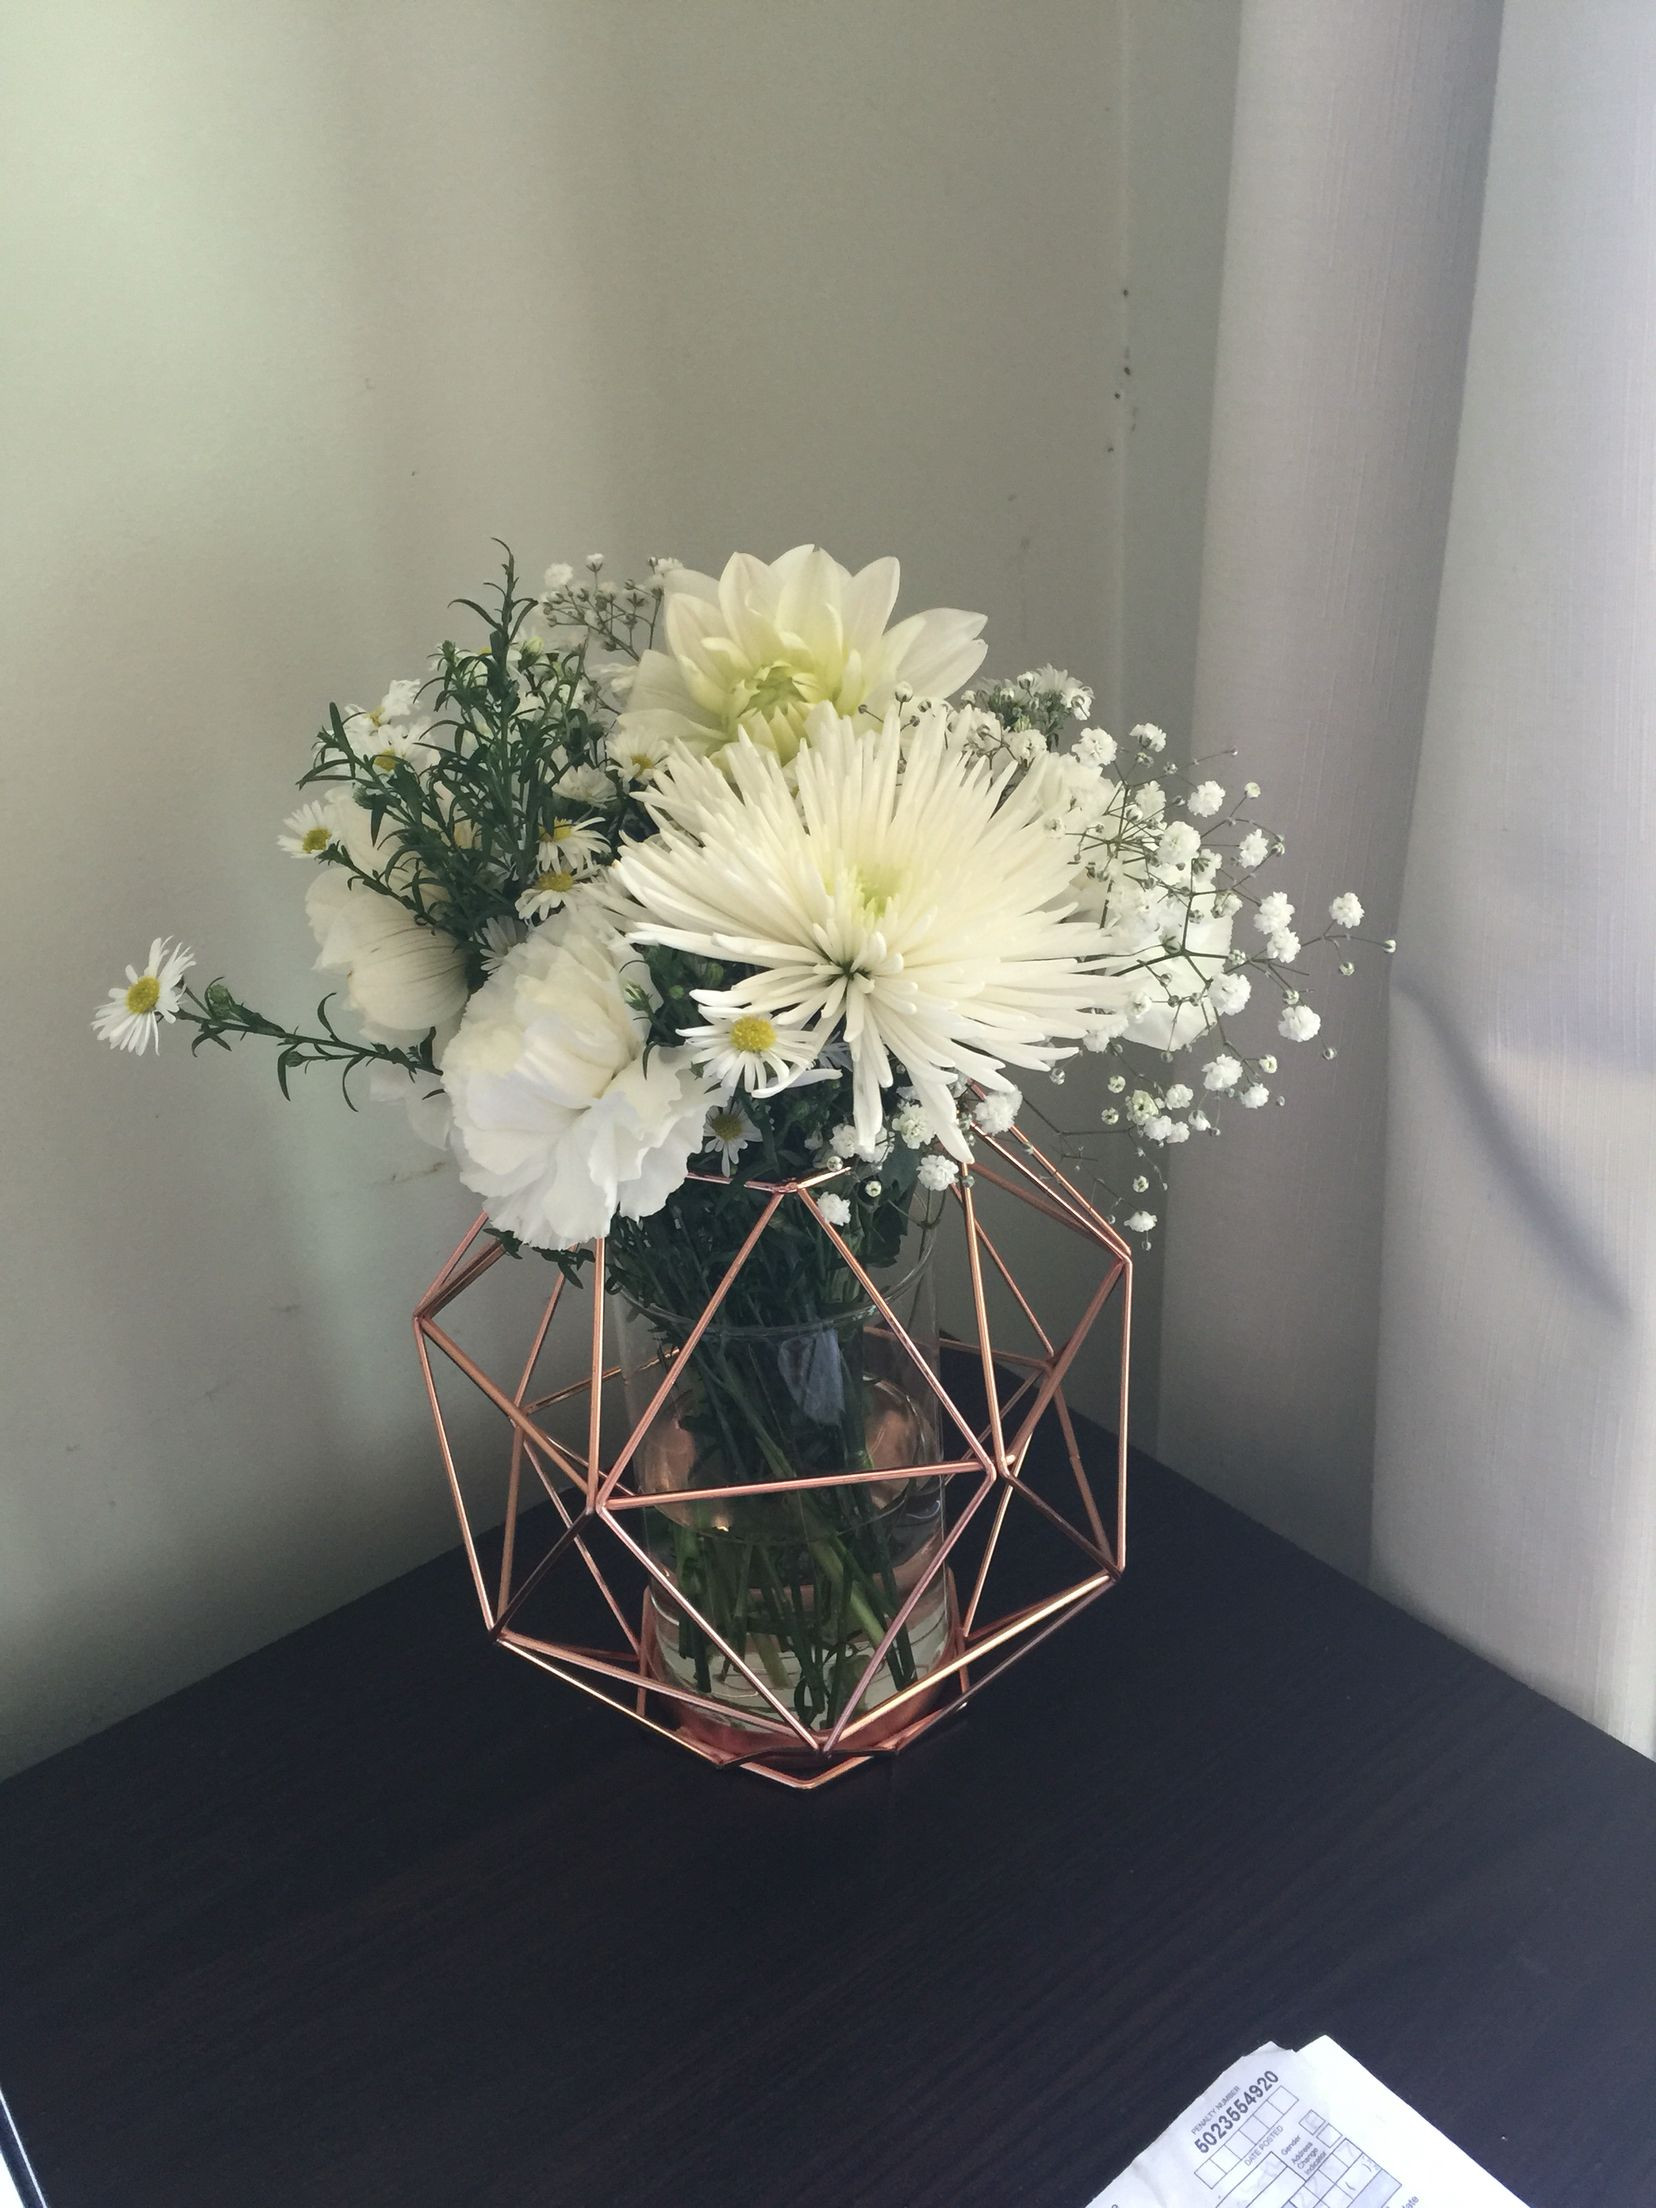 29 Fashionable wholesale Glass Vases In Downtown Los Angeles 2024 free download wholesale glass vases in downtown los angeles of copper geometric candle holder from kmart used as a vase wedding with regard to copper geometric candle holder from kmart used as a vase